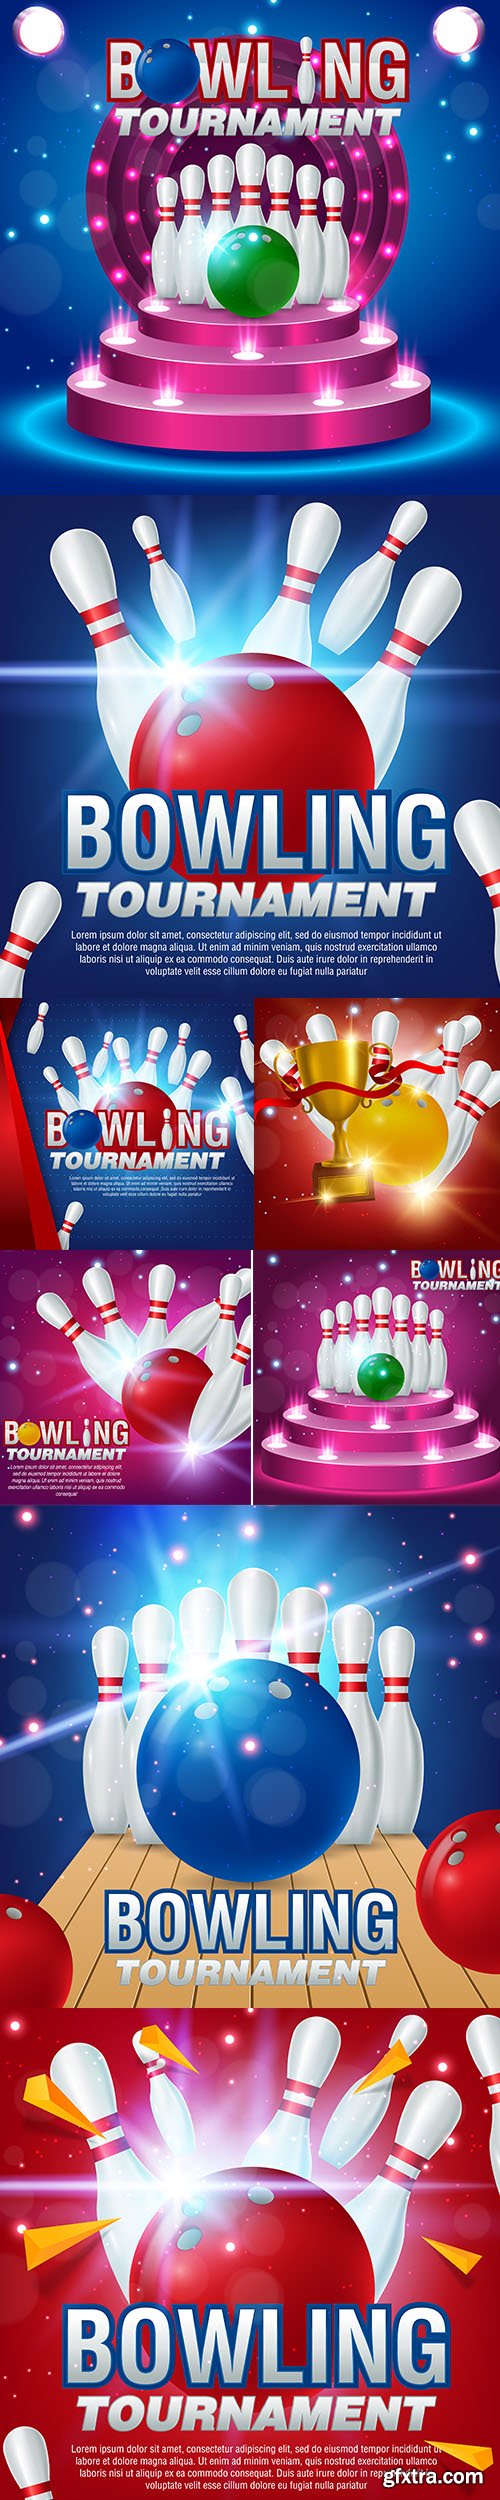 Bowling Realistic Illustration Background Pack